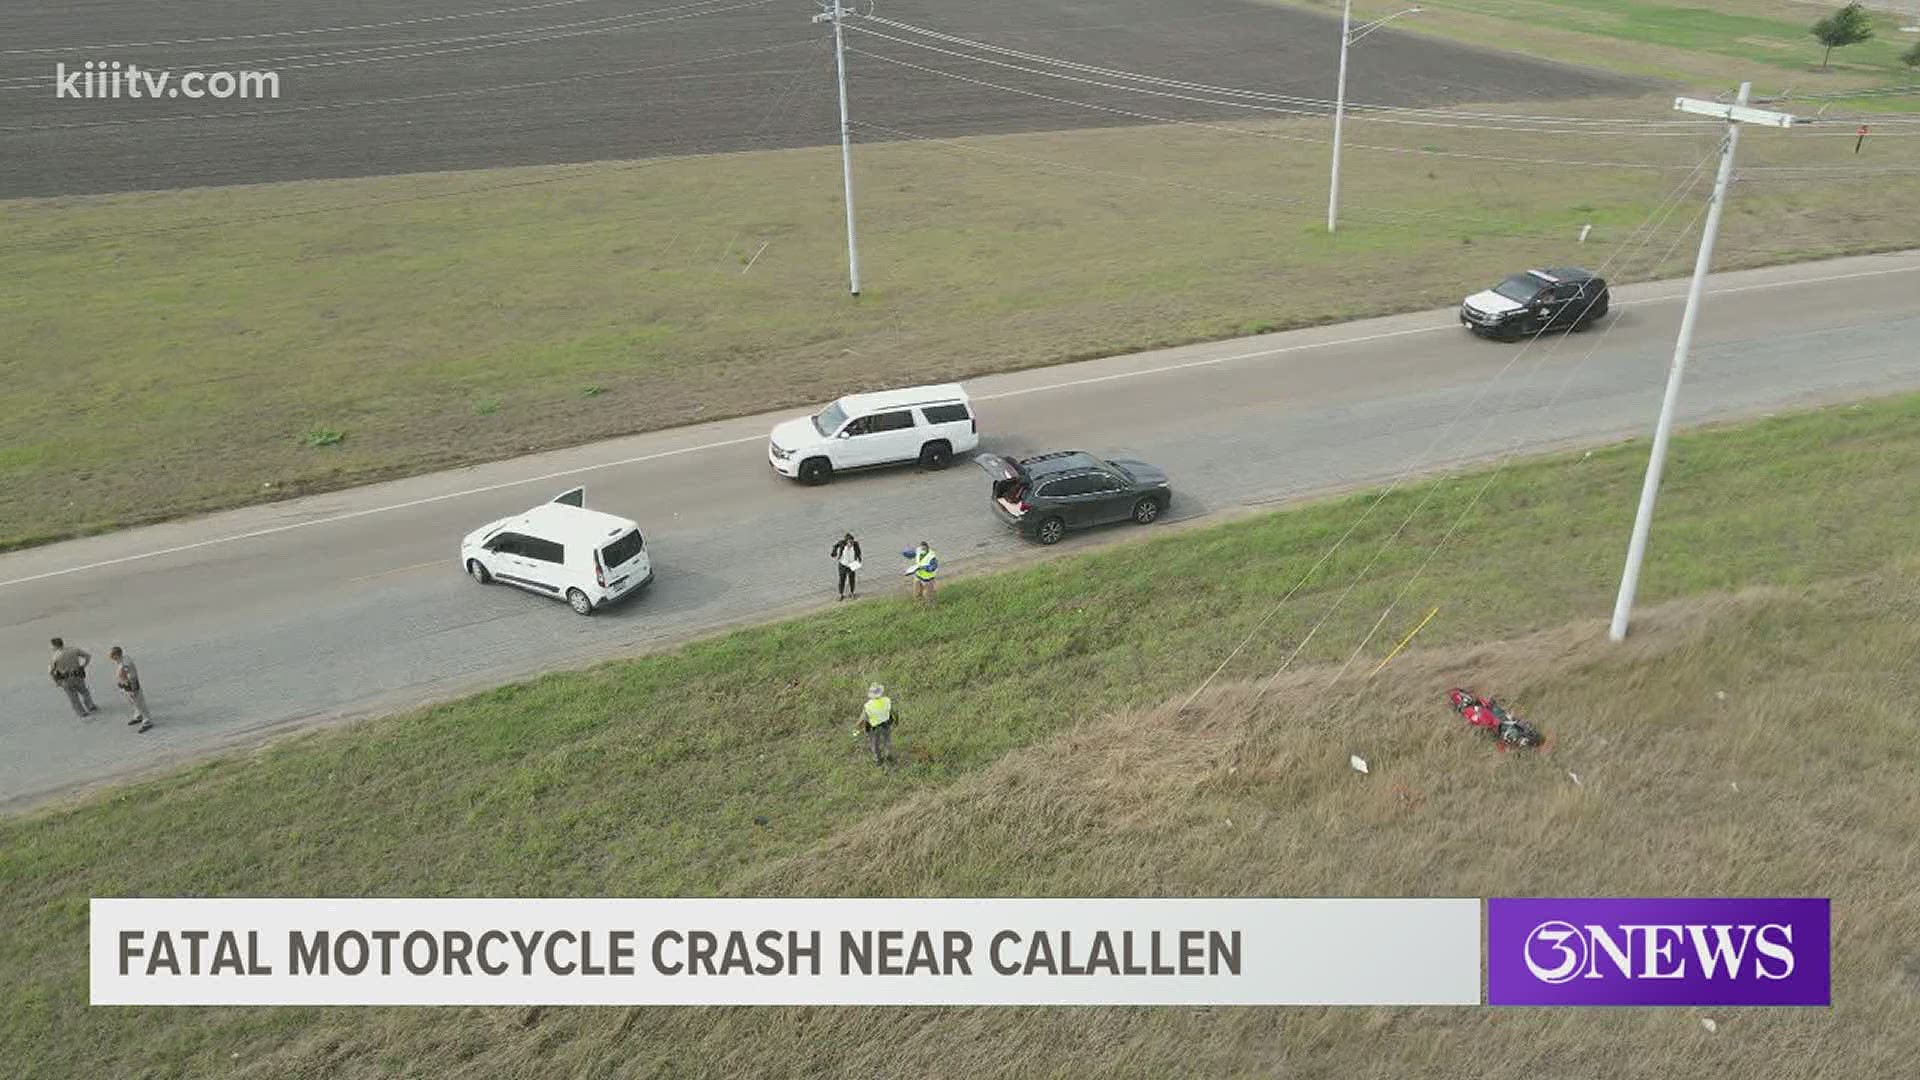 The accident happened on the 3500 block Cooperative Ave, near Calallen, between CR 69 and FM 1889.